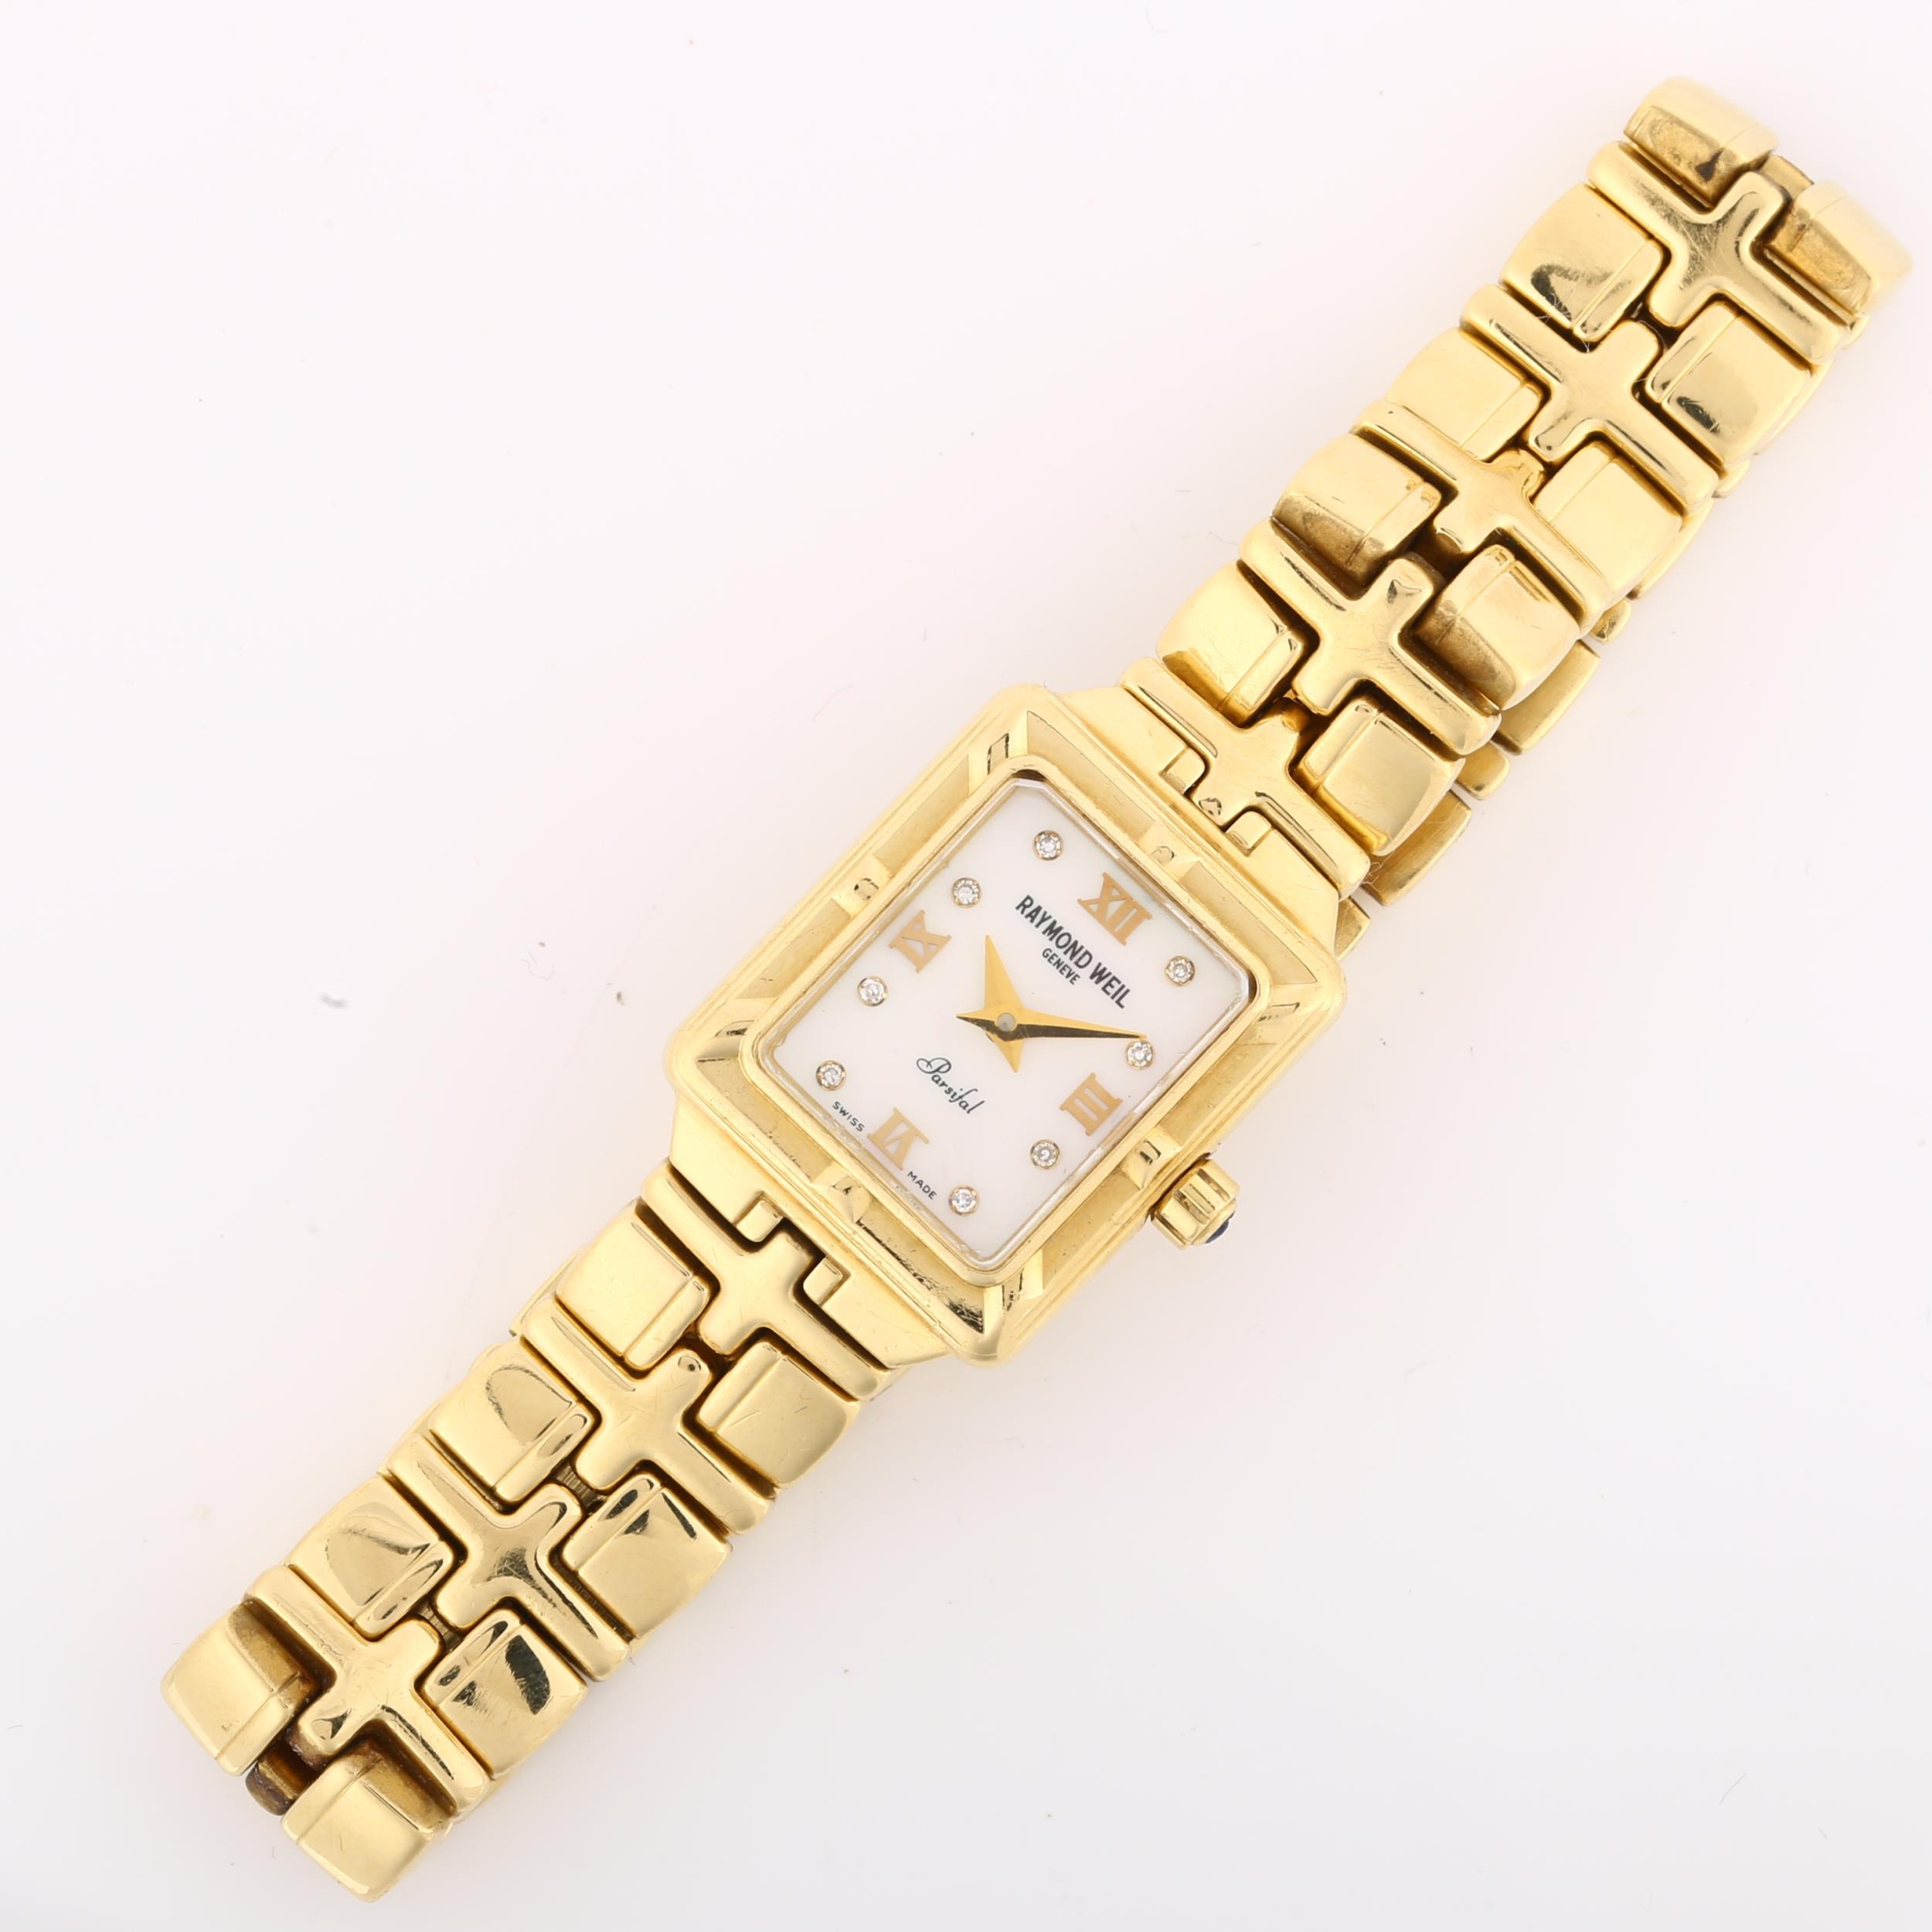 **WITHDRAWN** RAYMOND WEIL - a lady's 18ct gold Parsifal quartz bracelet watch, ref. 10.290, pink mo - Image 2 of 5